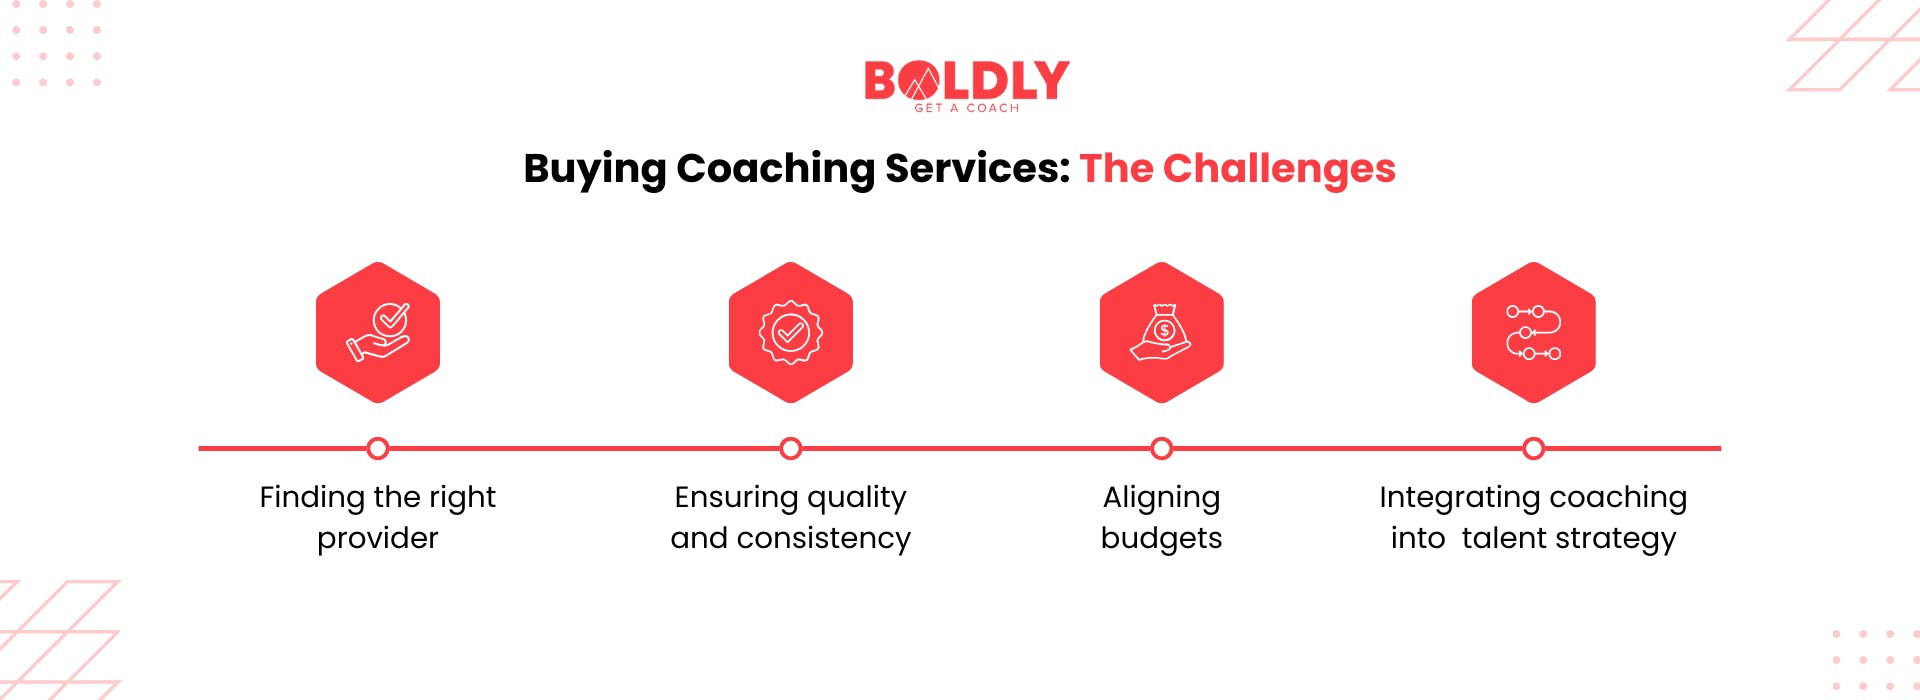 The challenges of buying coaching services